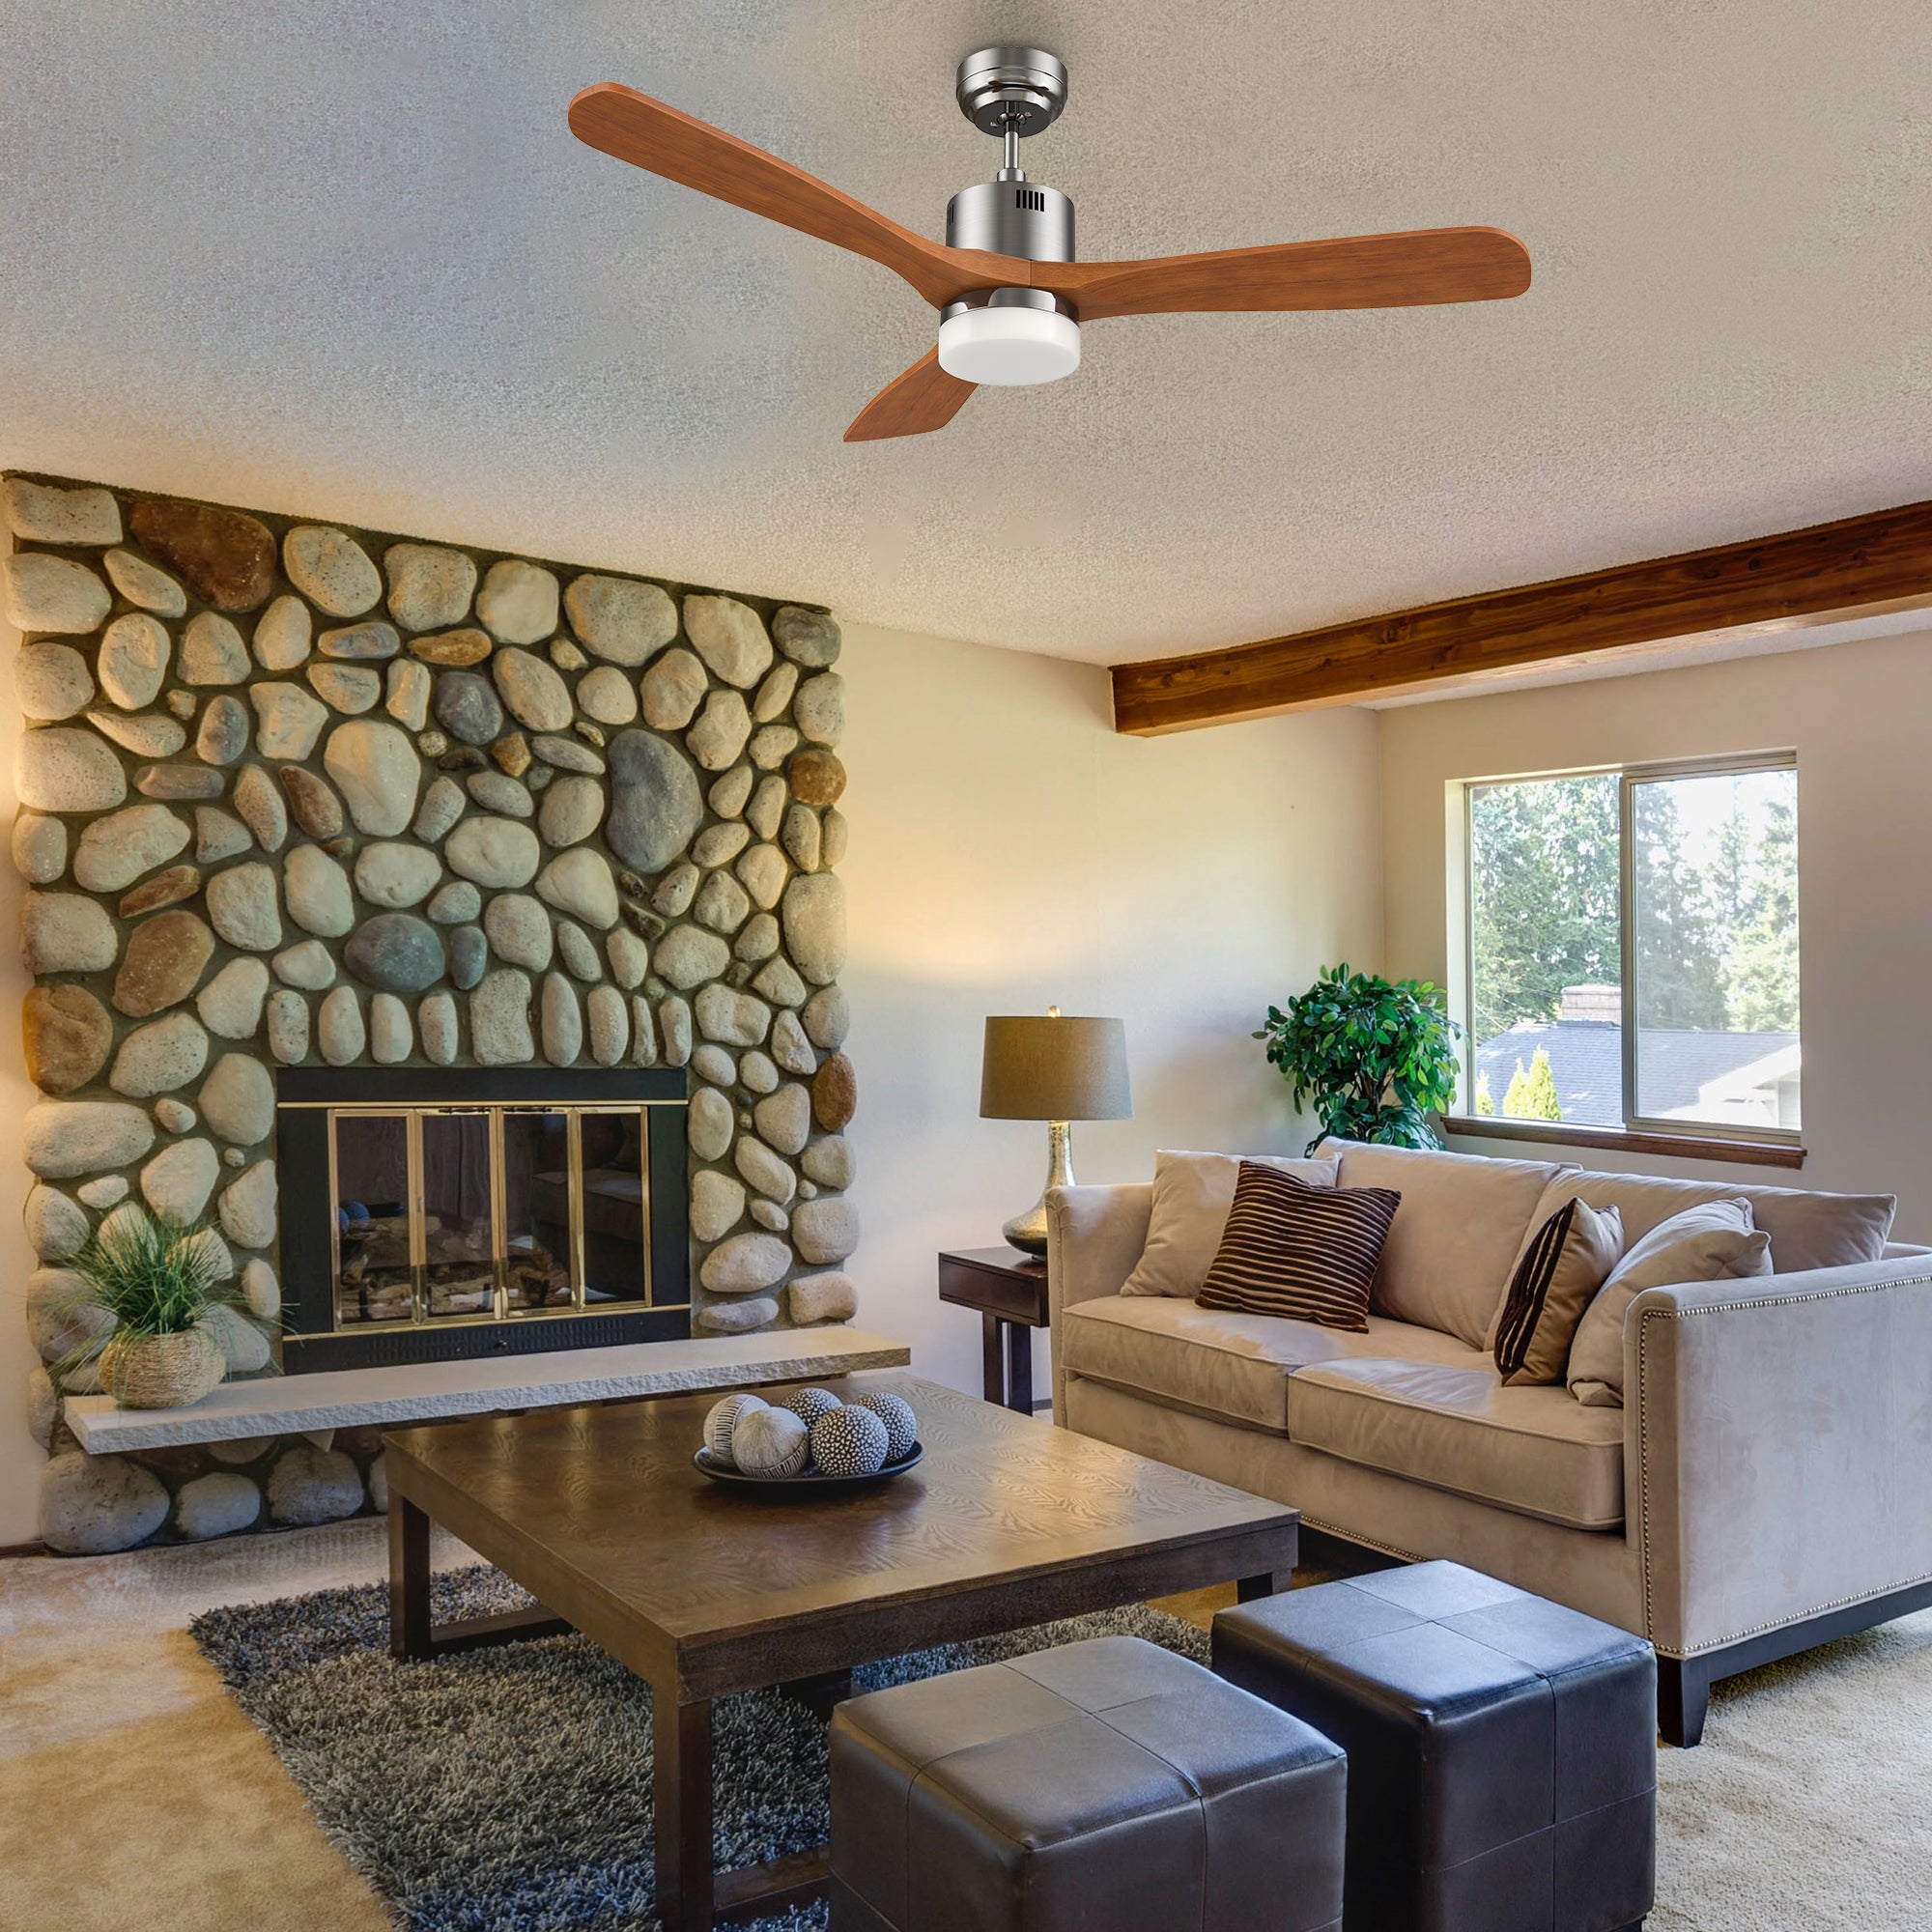 This Eton52'' smart ceiling fan keeps your space cool, bright, and stylish. It is a soft modern masterpiece perfect for your large indoor living spaces. This Wifi smart ceiling fan is a simplicity designing with Silver finish, use elegant Solid Wood blades and has an integrated 4000K LED daylight. The fan features Remote control, Wi-Fi apps, Siri Shortcut and Voice control technology (compatible with Amazon Alexa and Google Home Assistant ) to set fan preferences.